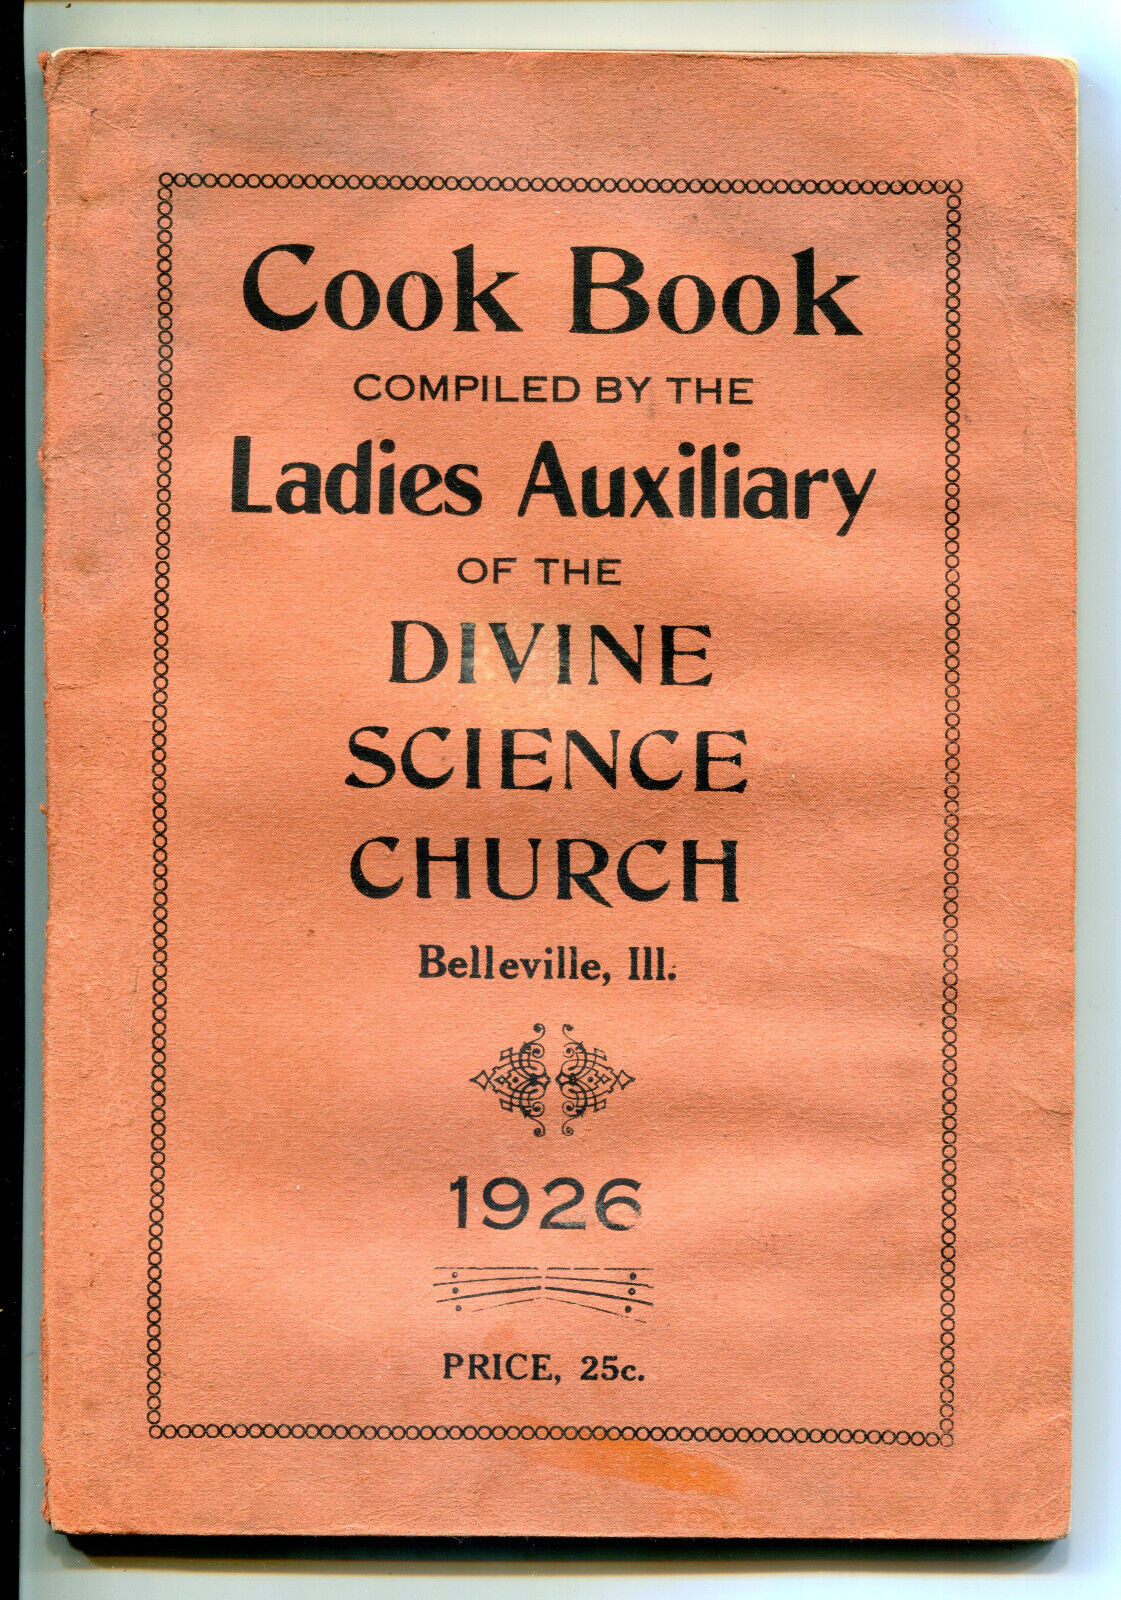 1926 Divine Science Church Cook Book, Ladies Auxiliary, Belleville, IL